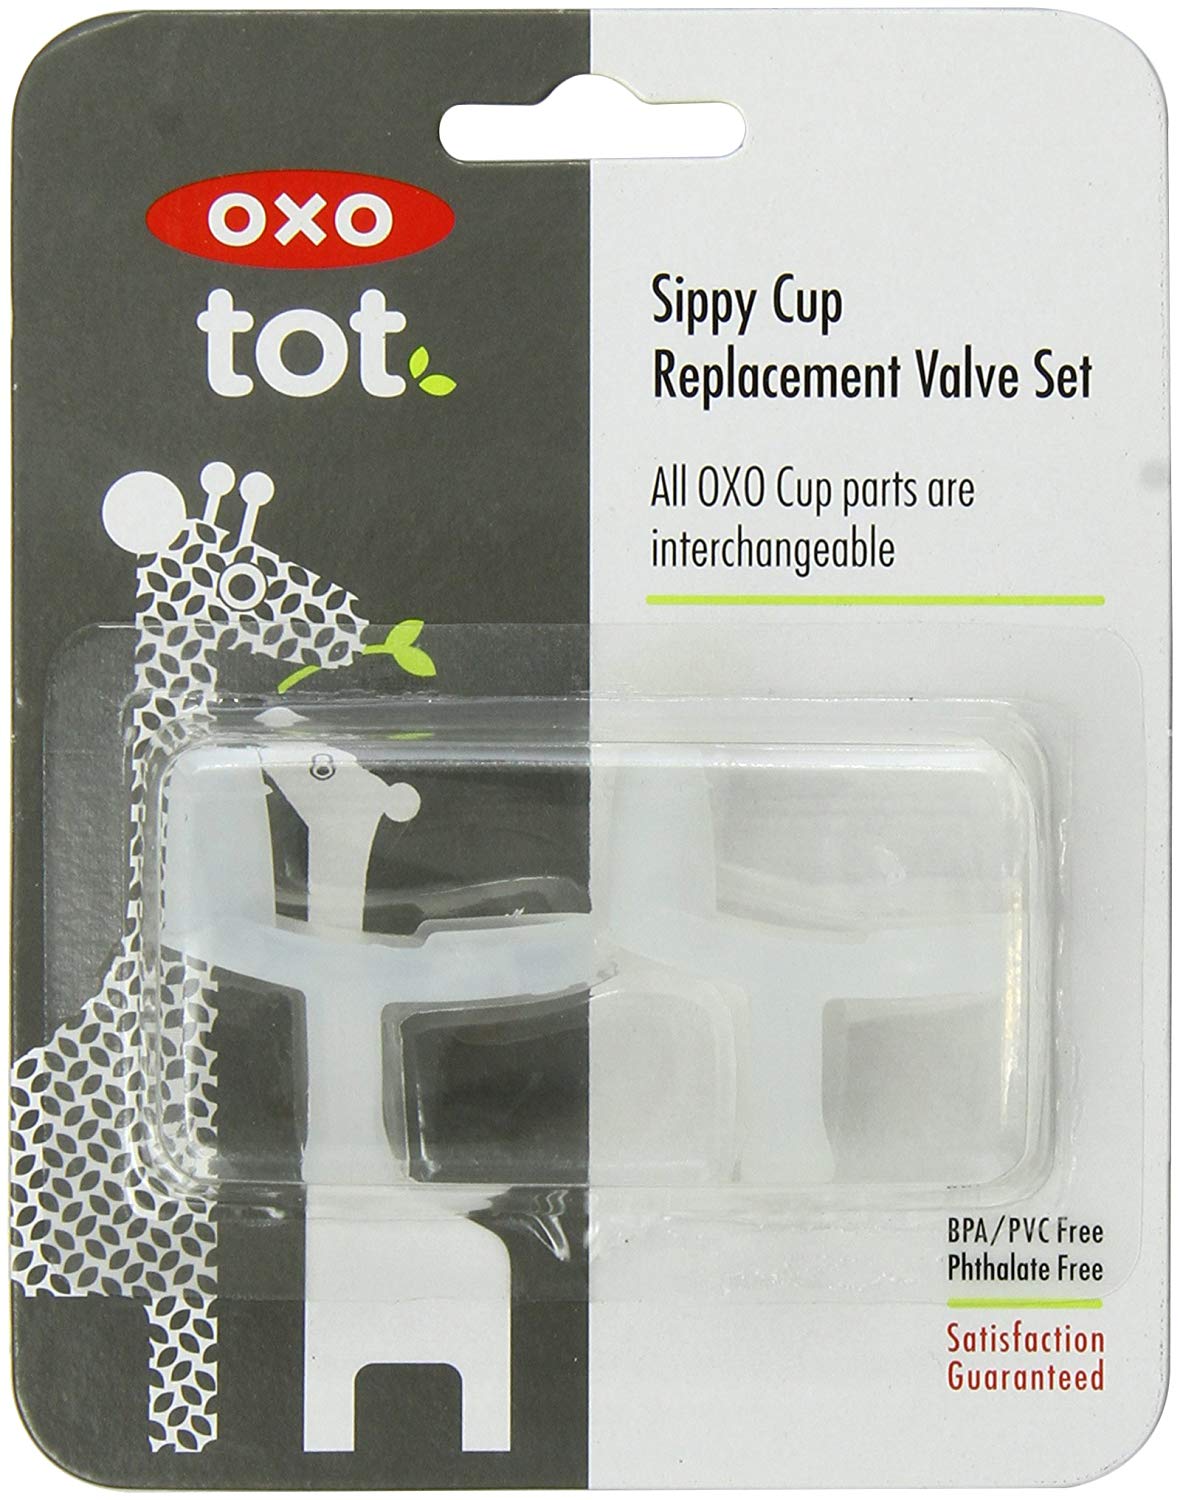 OXOtot Sippy Cup Replacement Valve Set